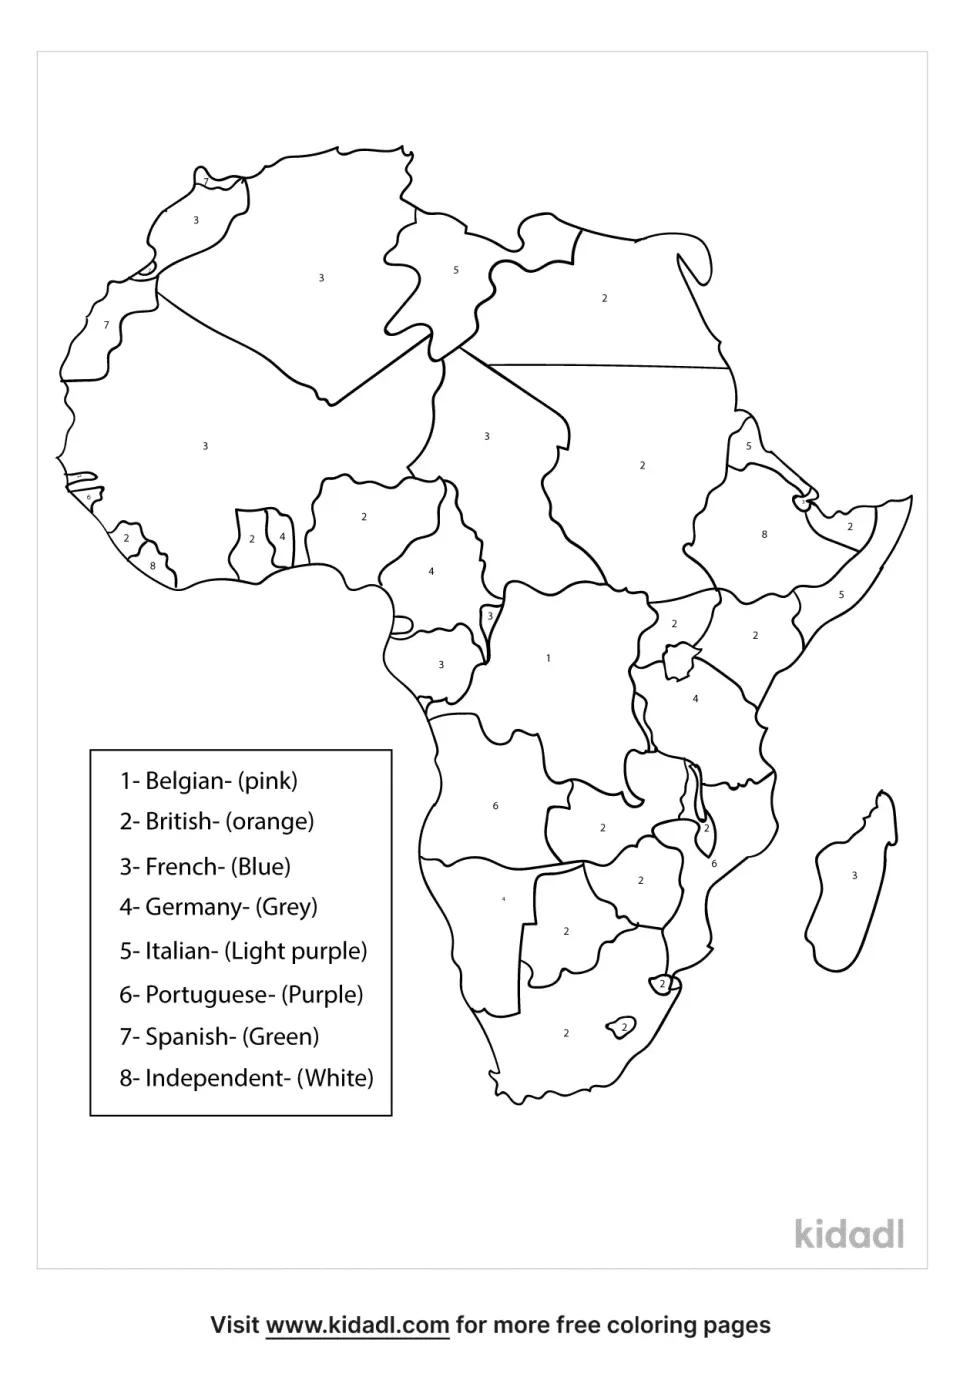 Colonial Africa Map Labeled Coloring Page